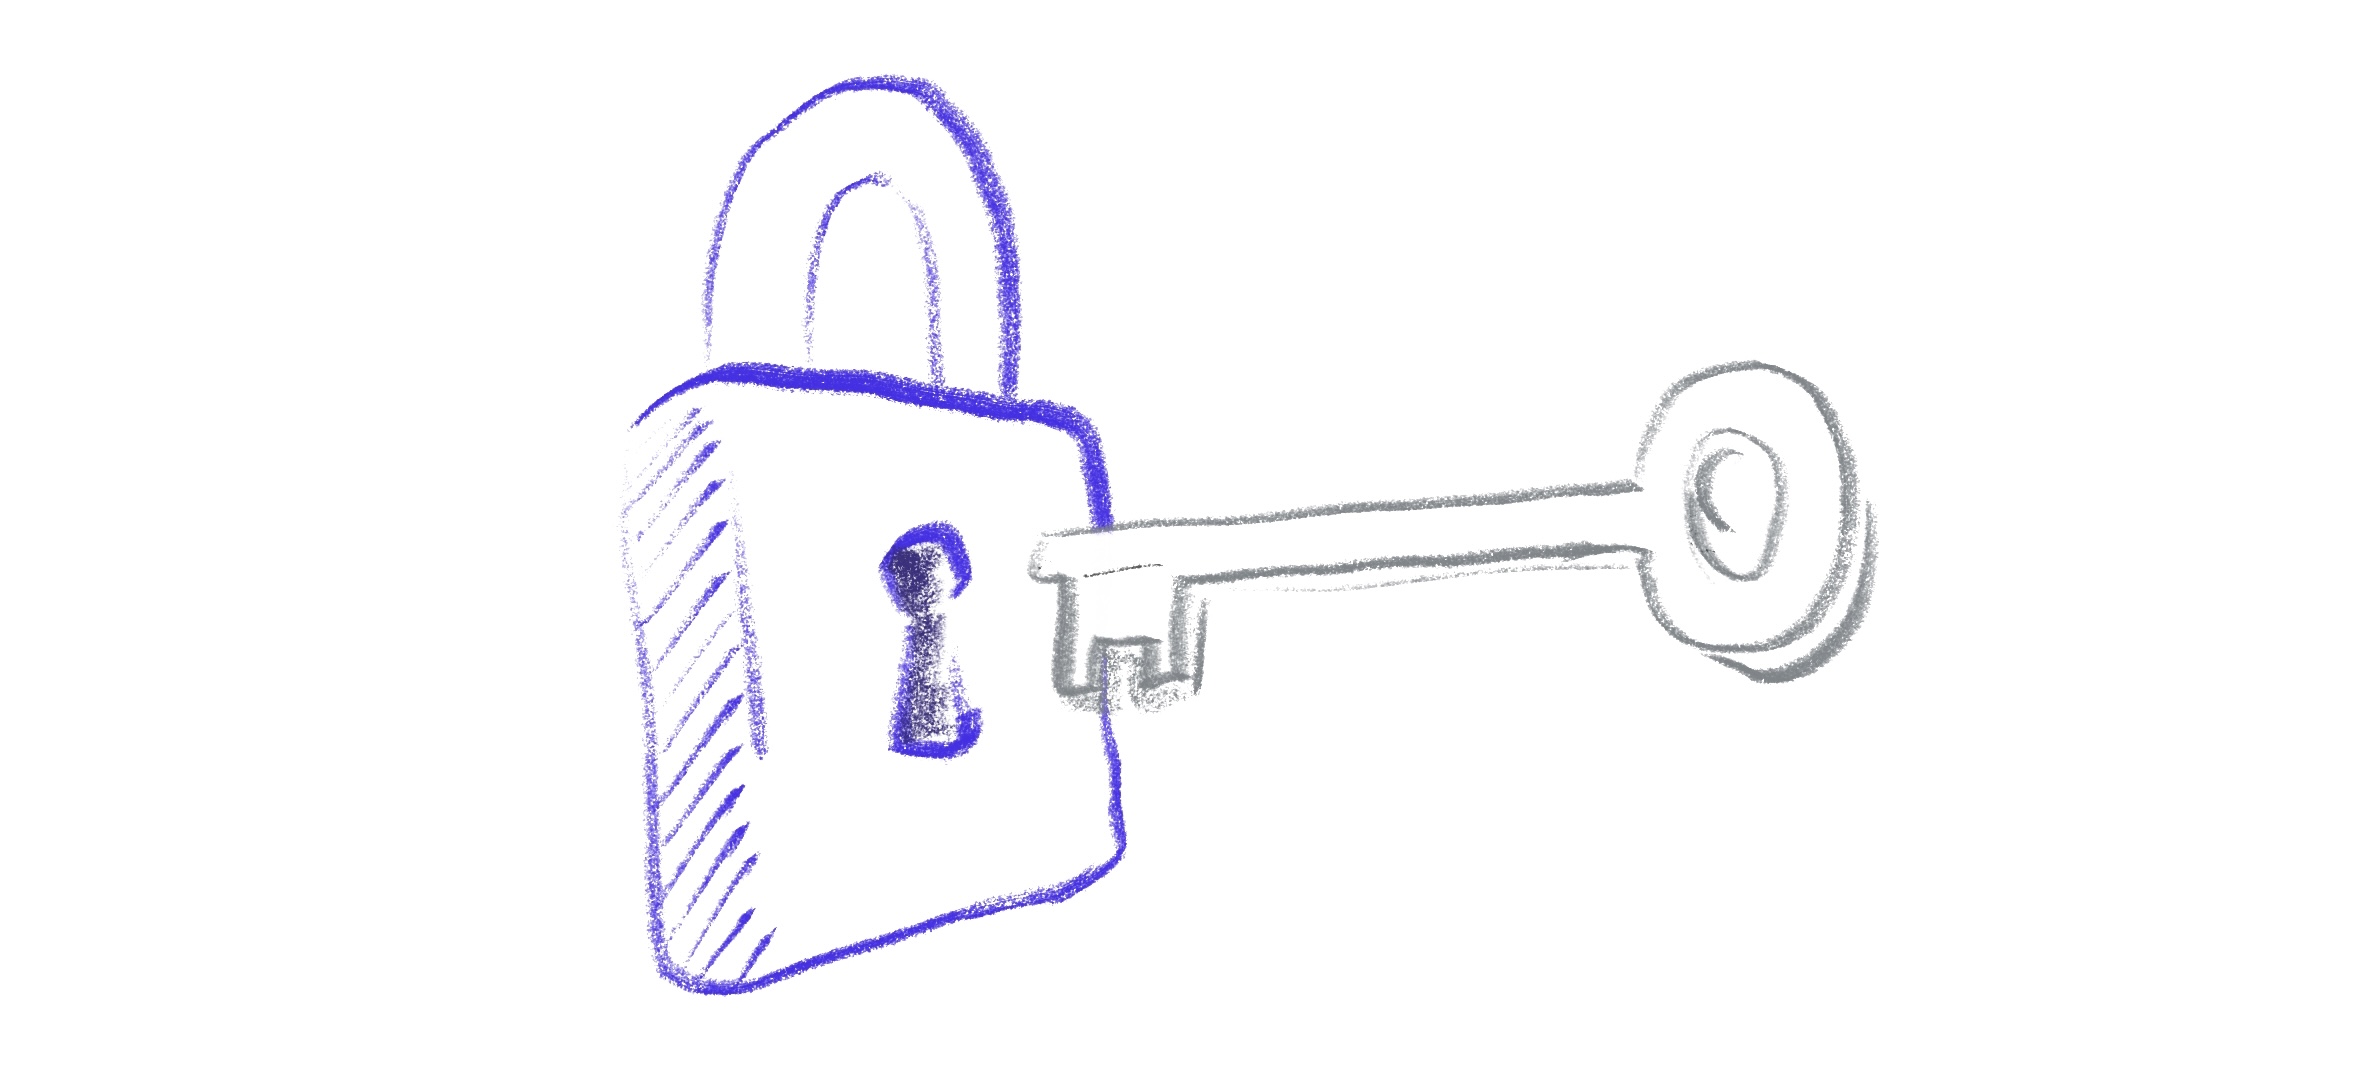 Conceptual drawing of a lock and key